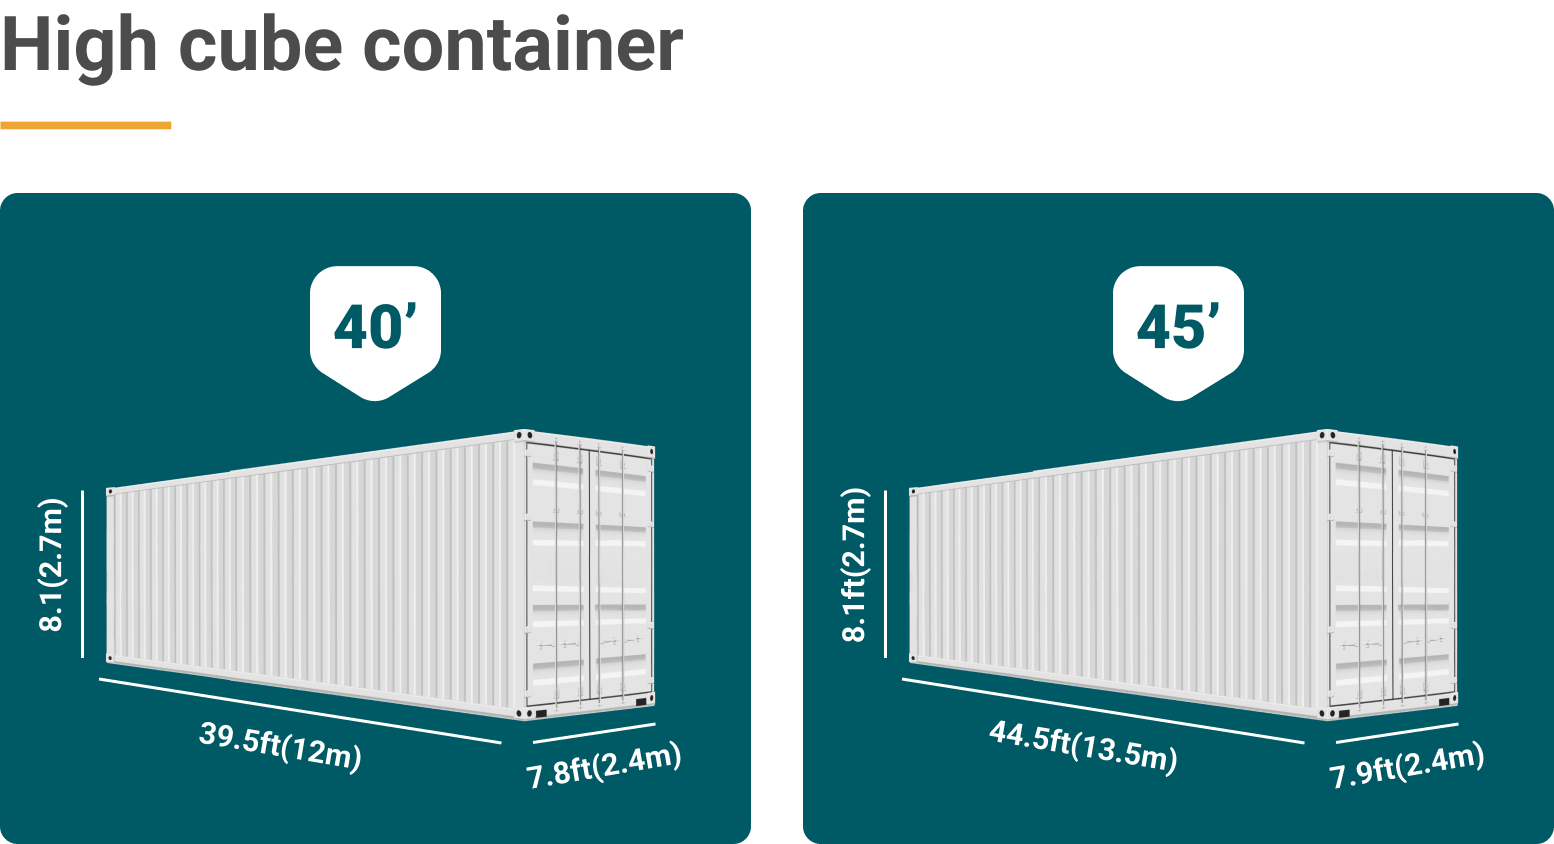 How Wide is a Conex Box?